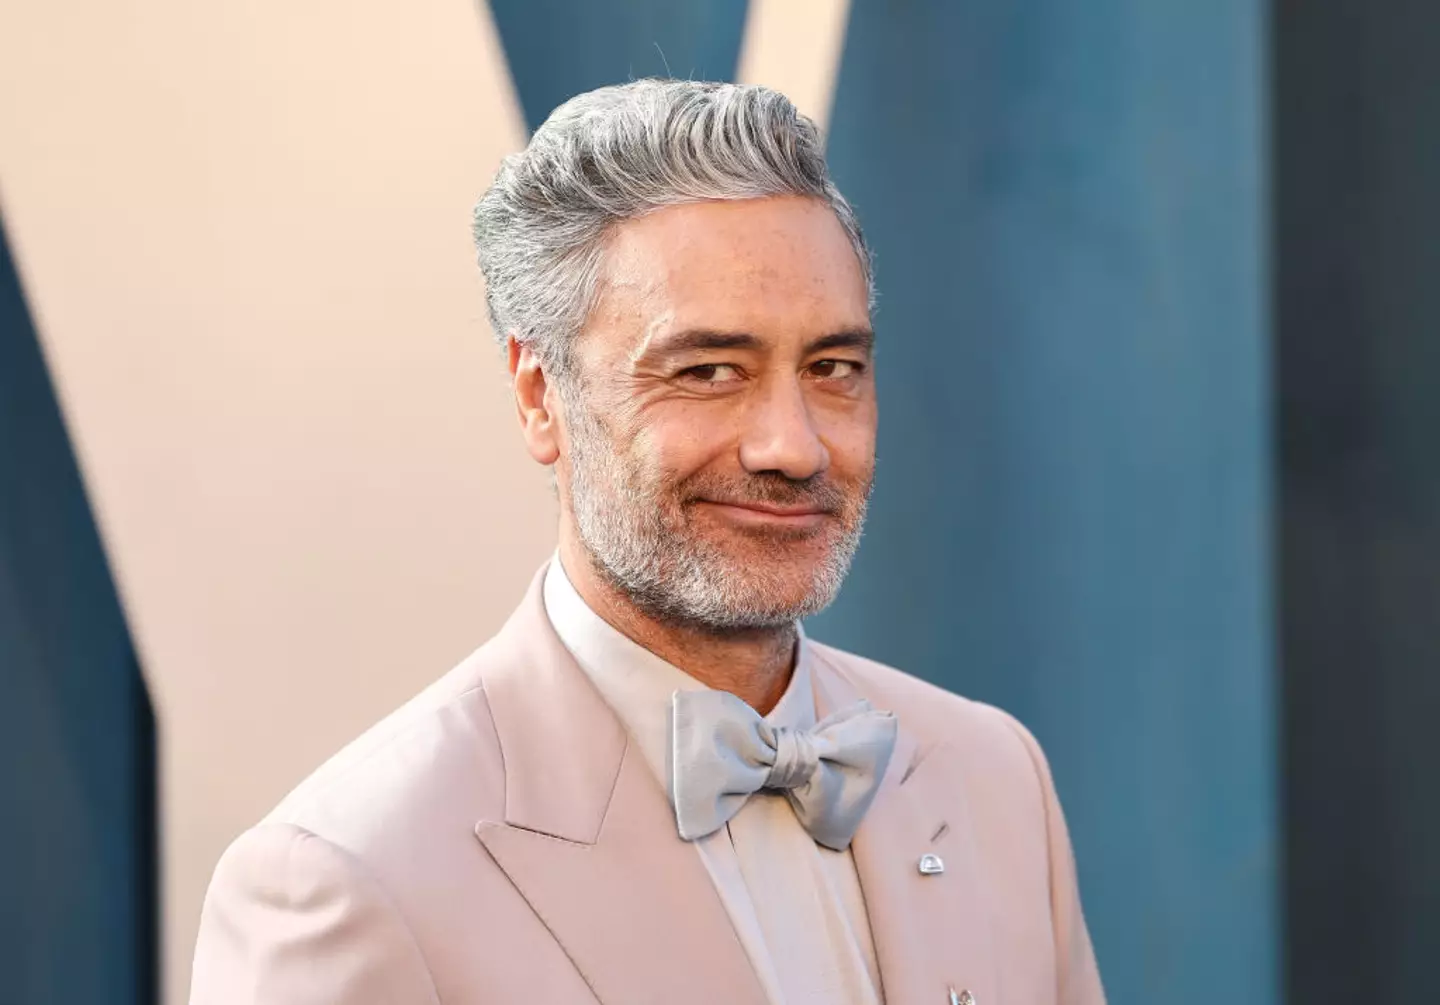 Taika Waititi has claimed that he 'hates working' and 'wants to retire'.